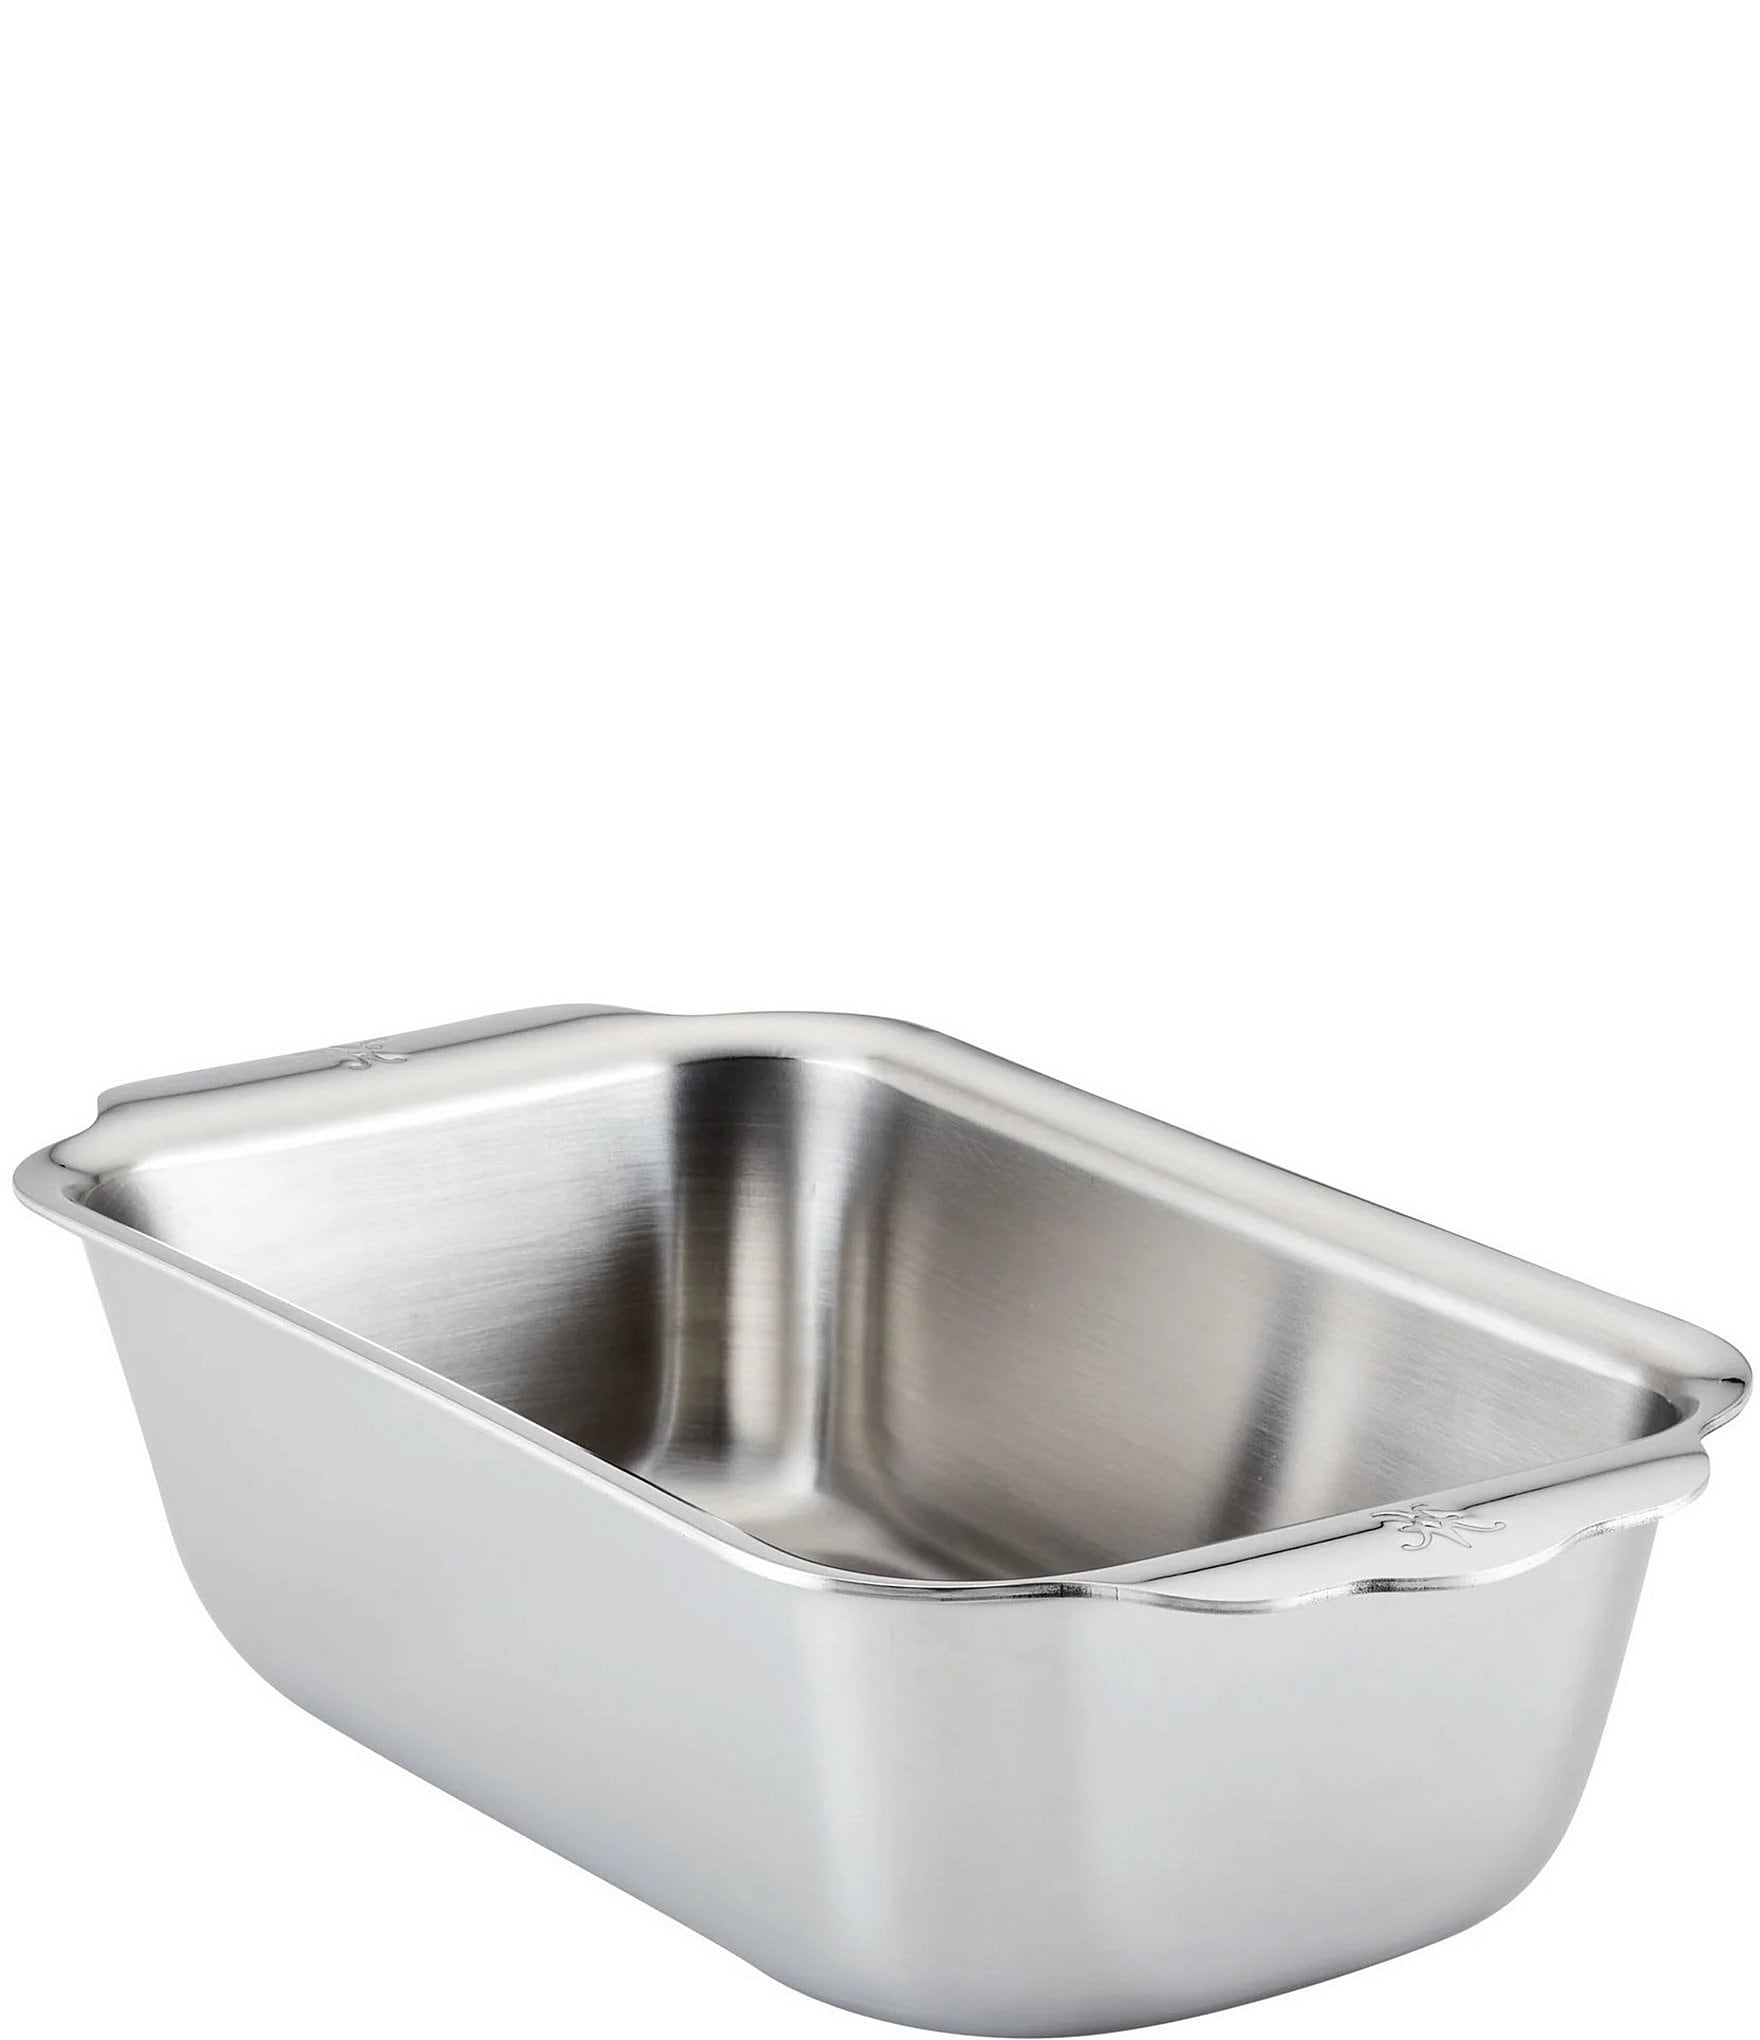 https://dimg.dillards.com/is/image/DillardsZoom/zoom/hestan-provisions-ovenbond-tri-ply-stainless-steel-1-pound-loaf-pan/00000000_zi_20417559.jpg